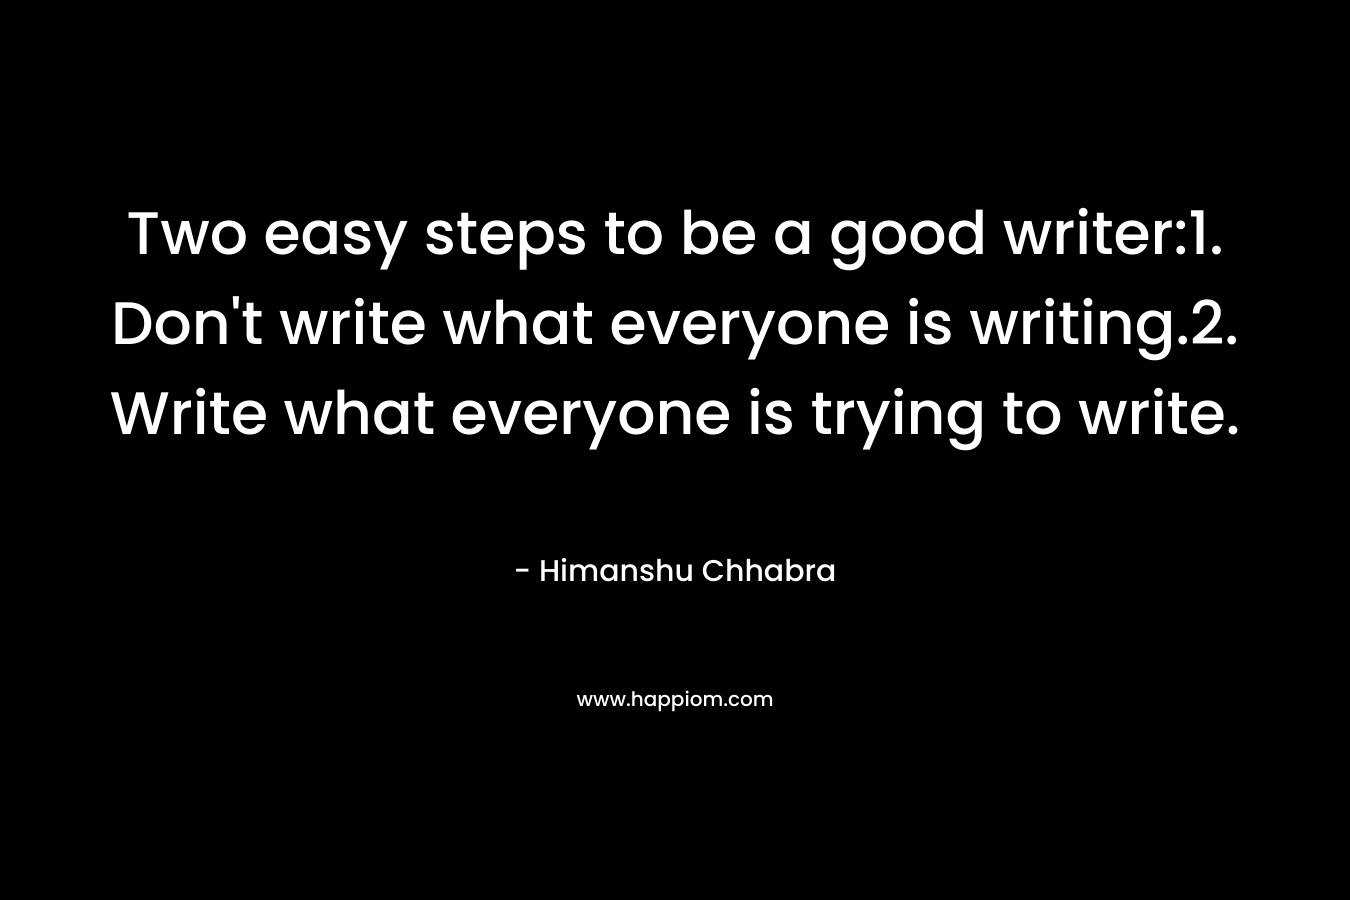 Two easy steps to be a good writer:1. Don't write what everyone is writing.2. Write what everyone is trying to write.